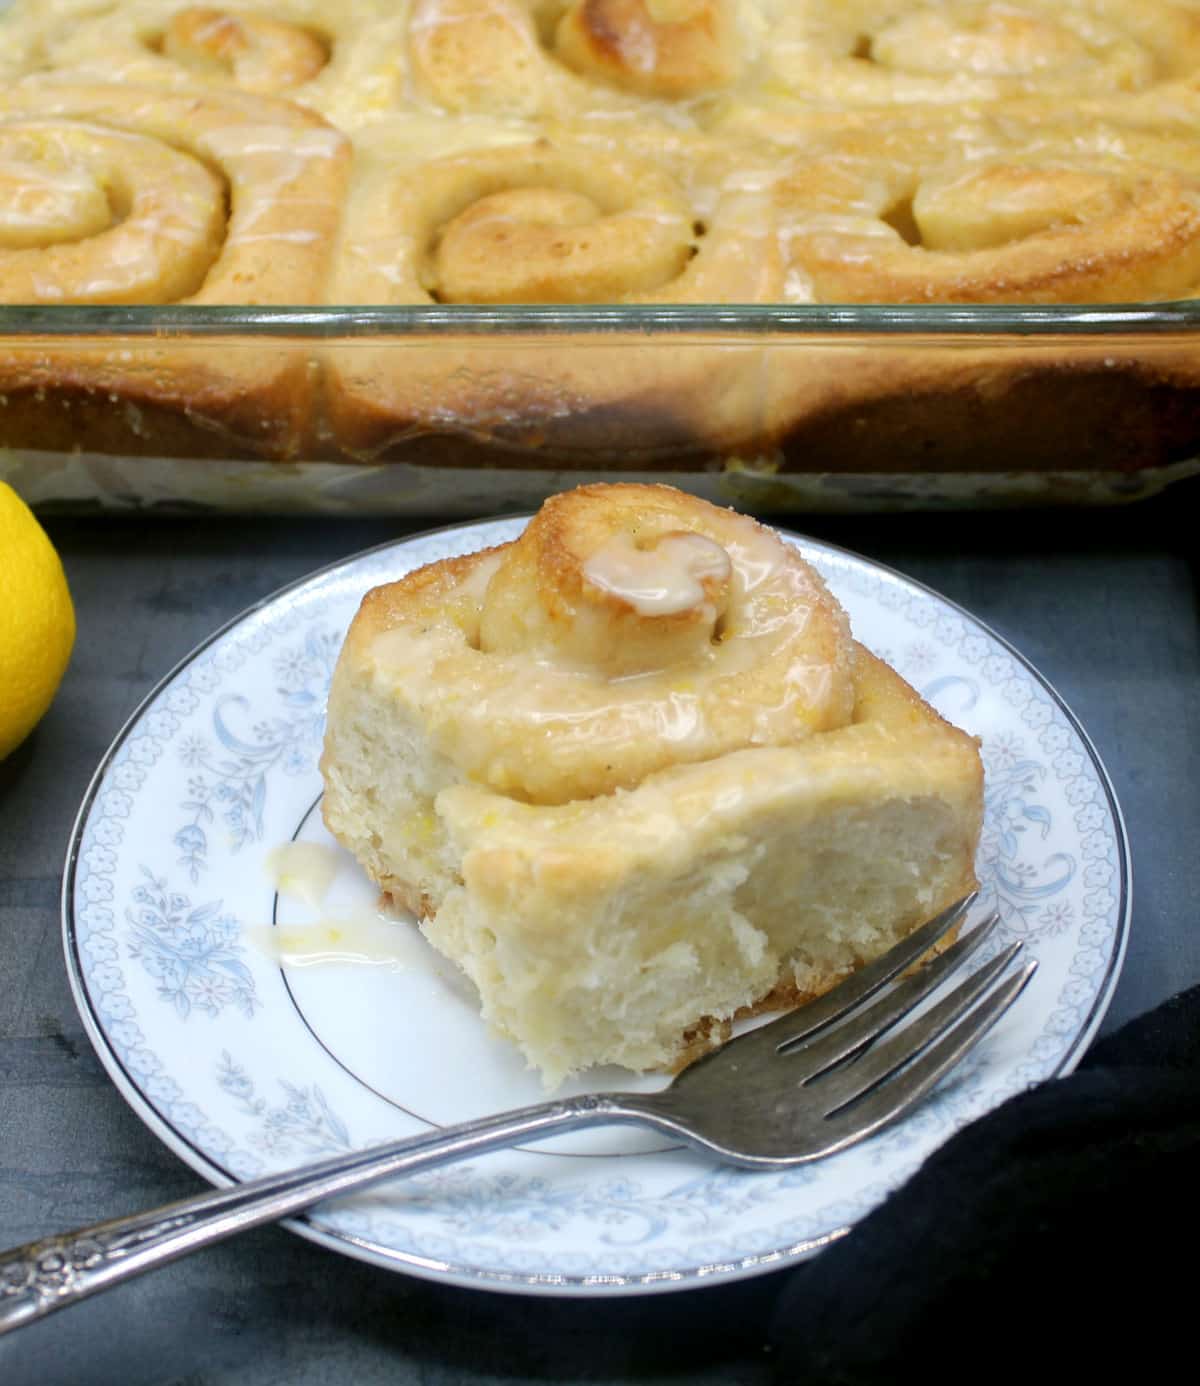 A vegan lemon sweet roll with sticky lemon glaze on a blue and white china plate with rolls in the baking dish and a lemon in the background.